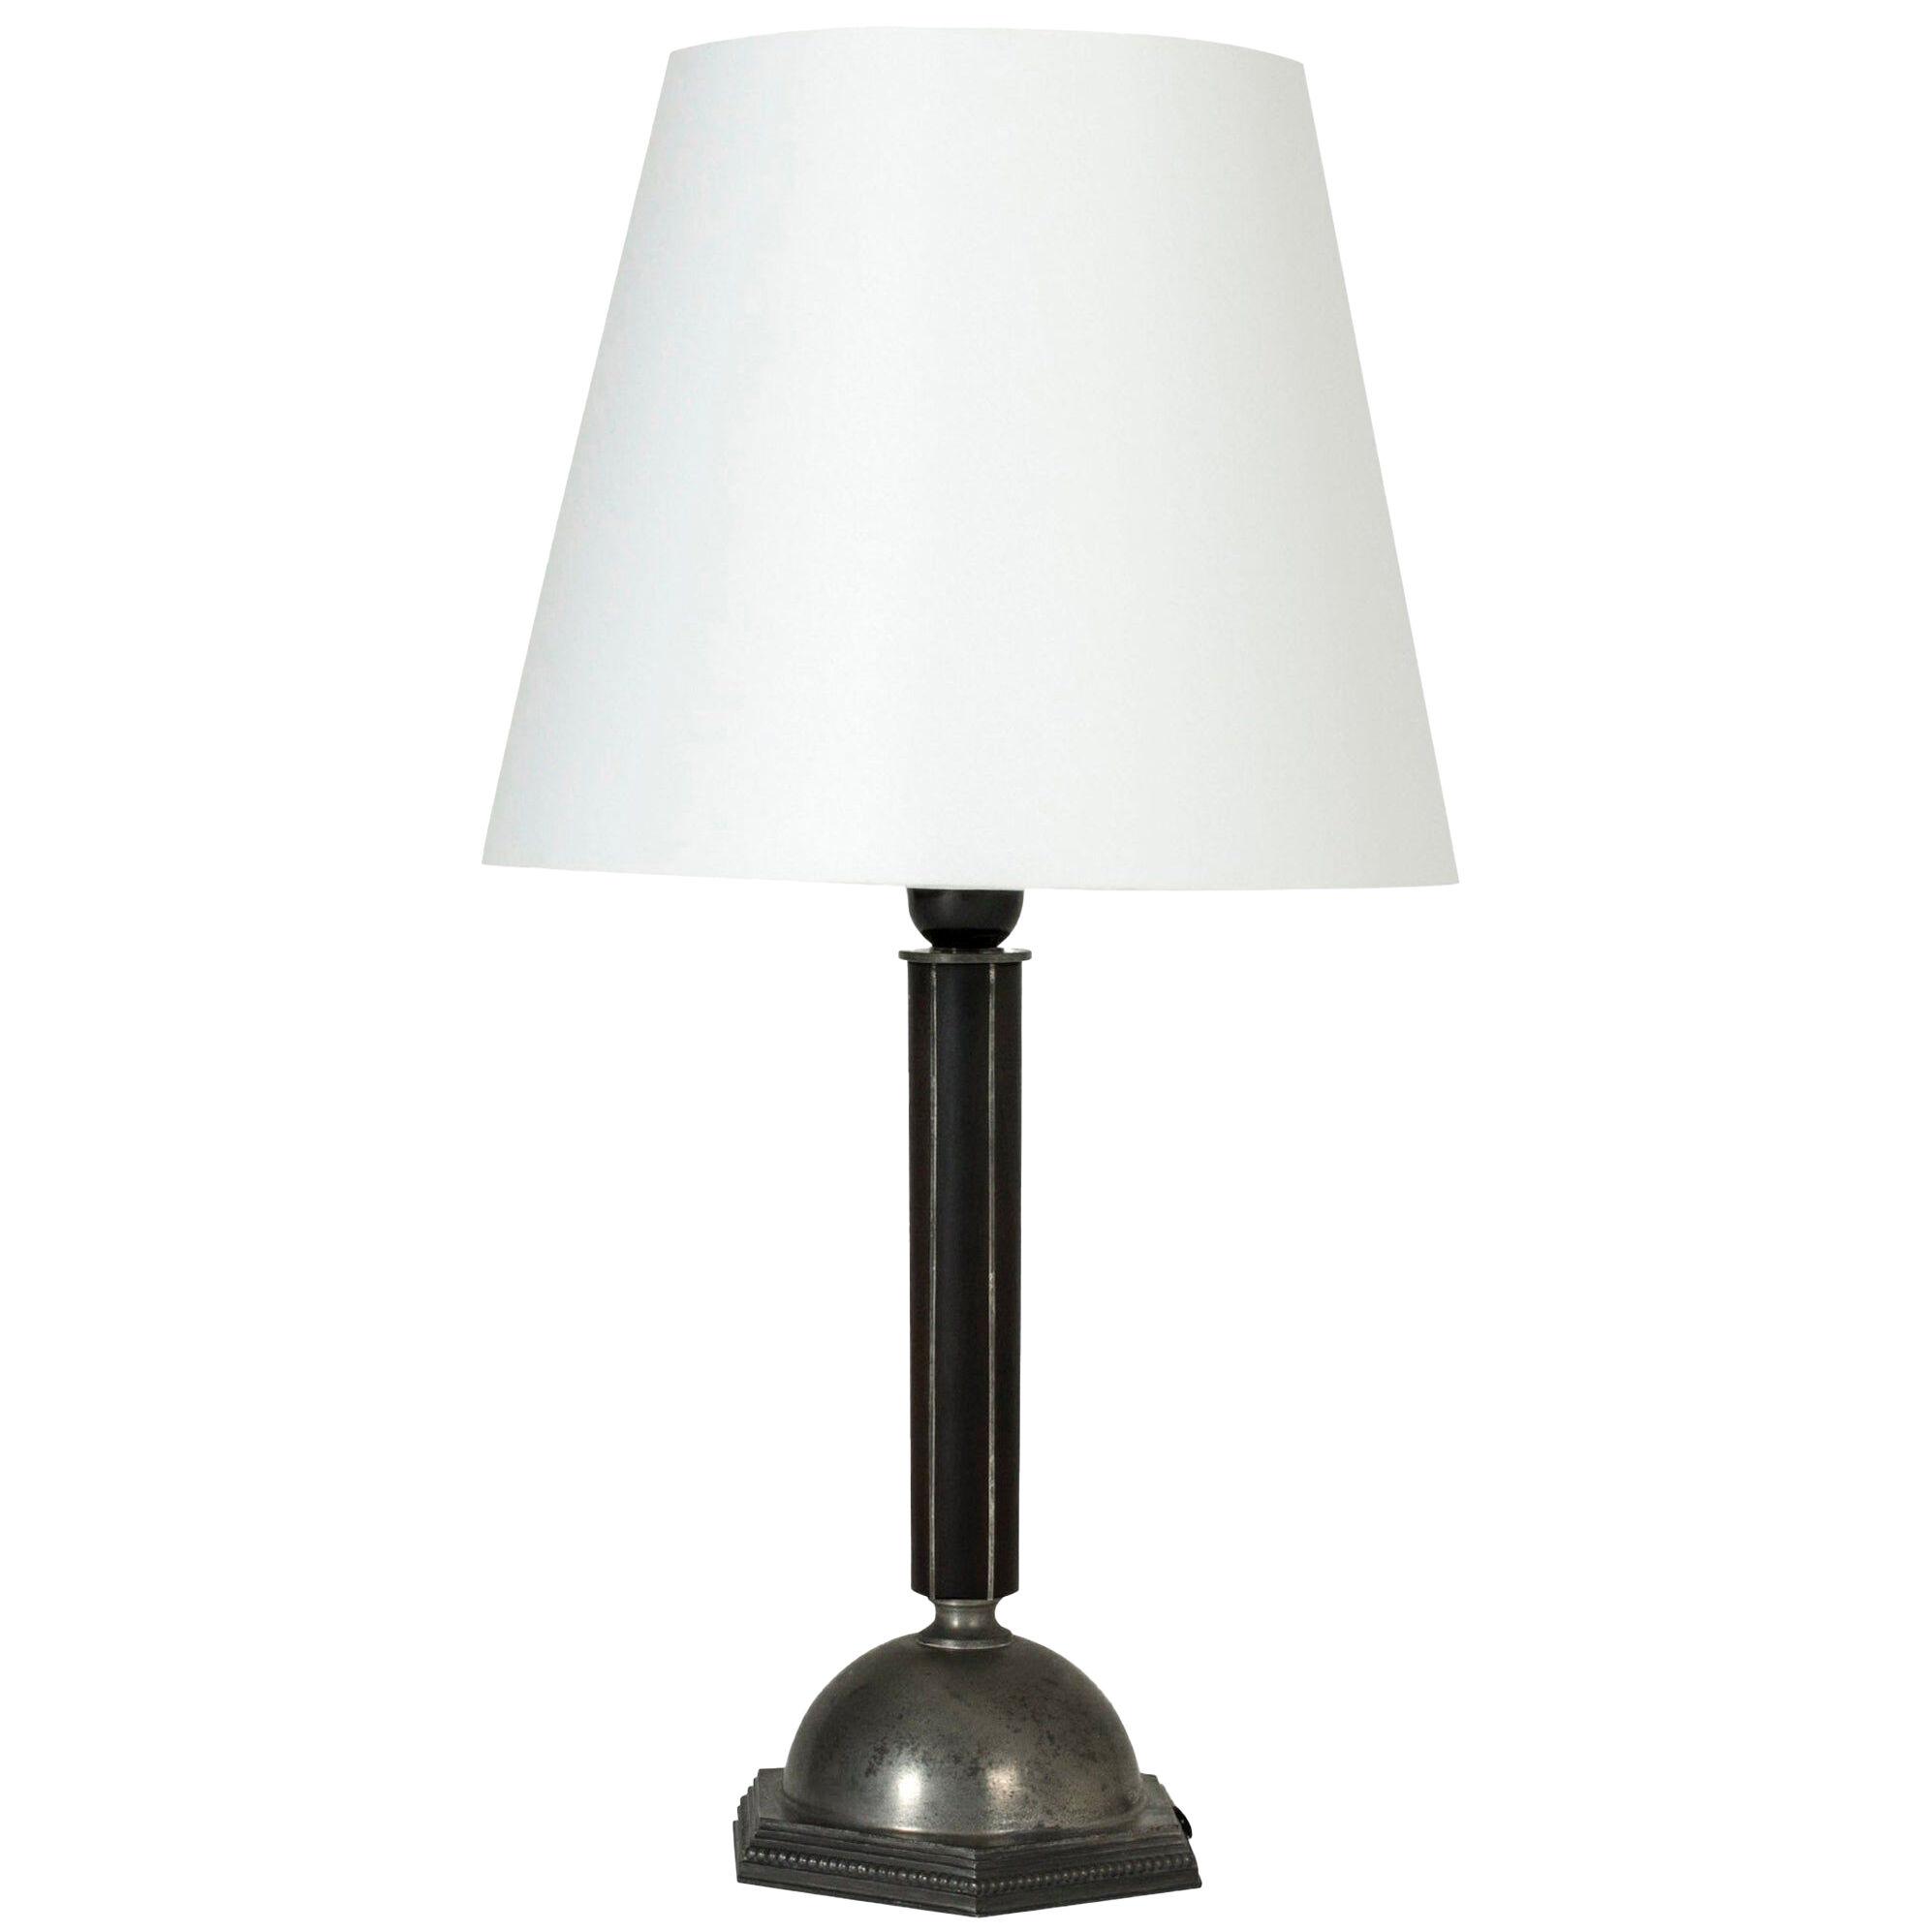 Pewter and Ebony Table Lamp from C. G. Hallberg